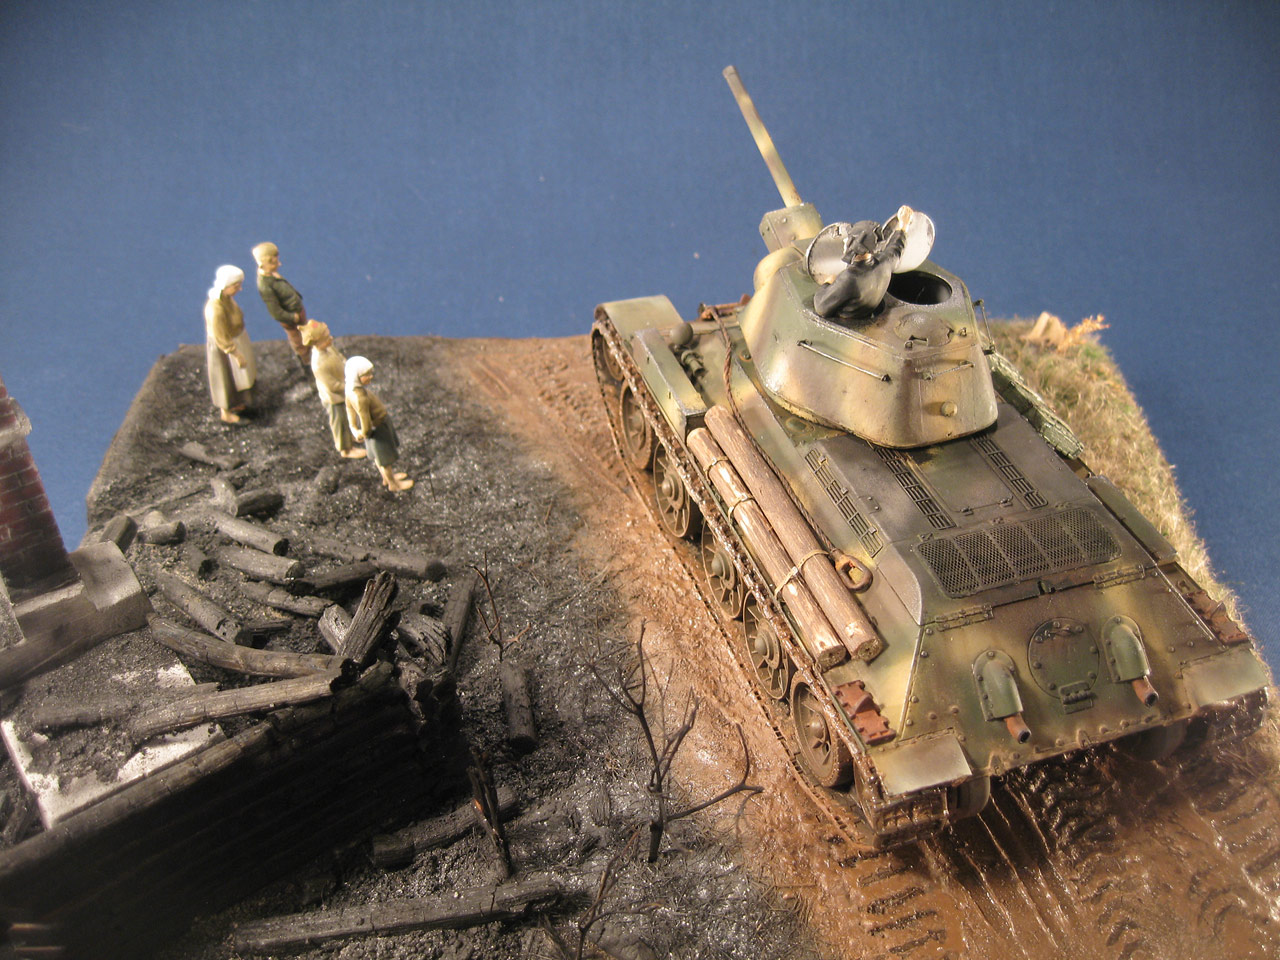 Dioramas and Vignettes: The burned land, photo #2